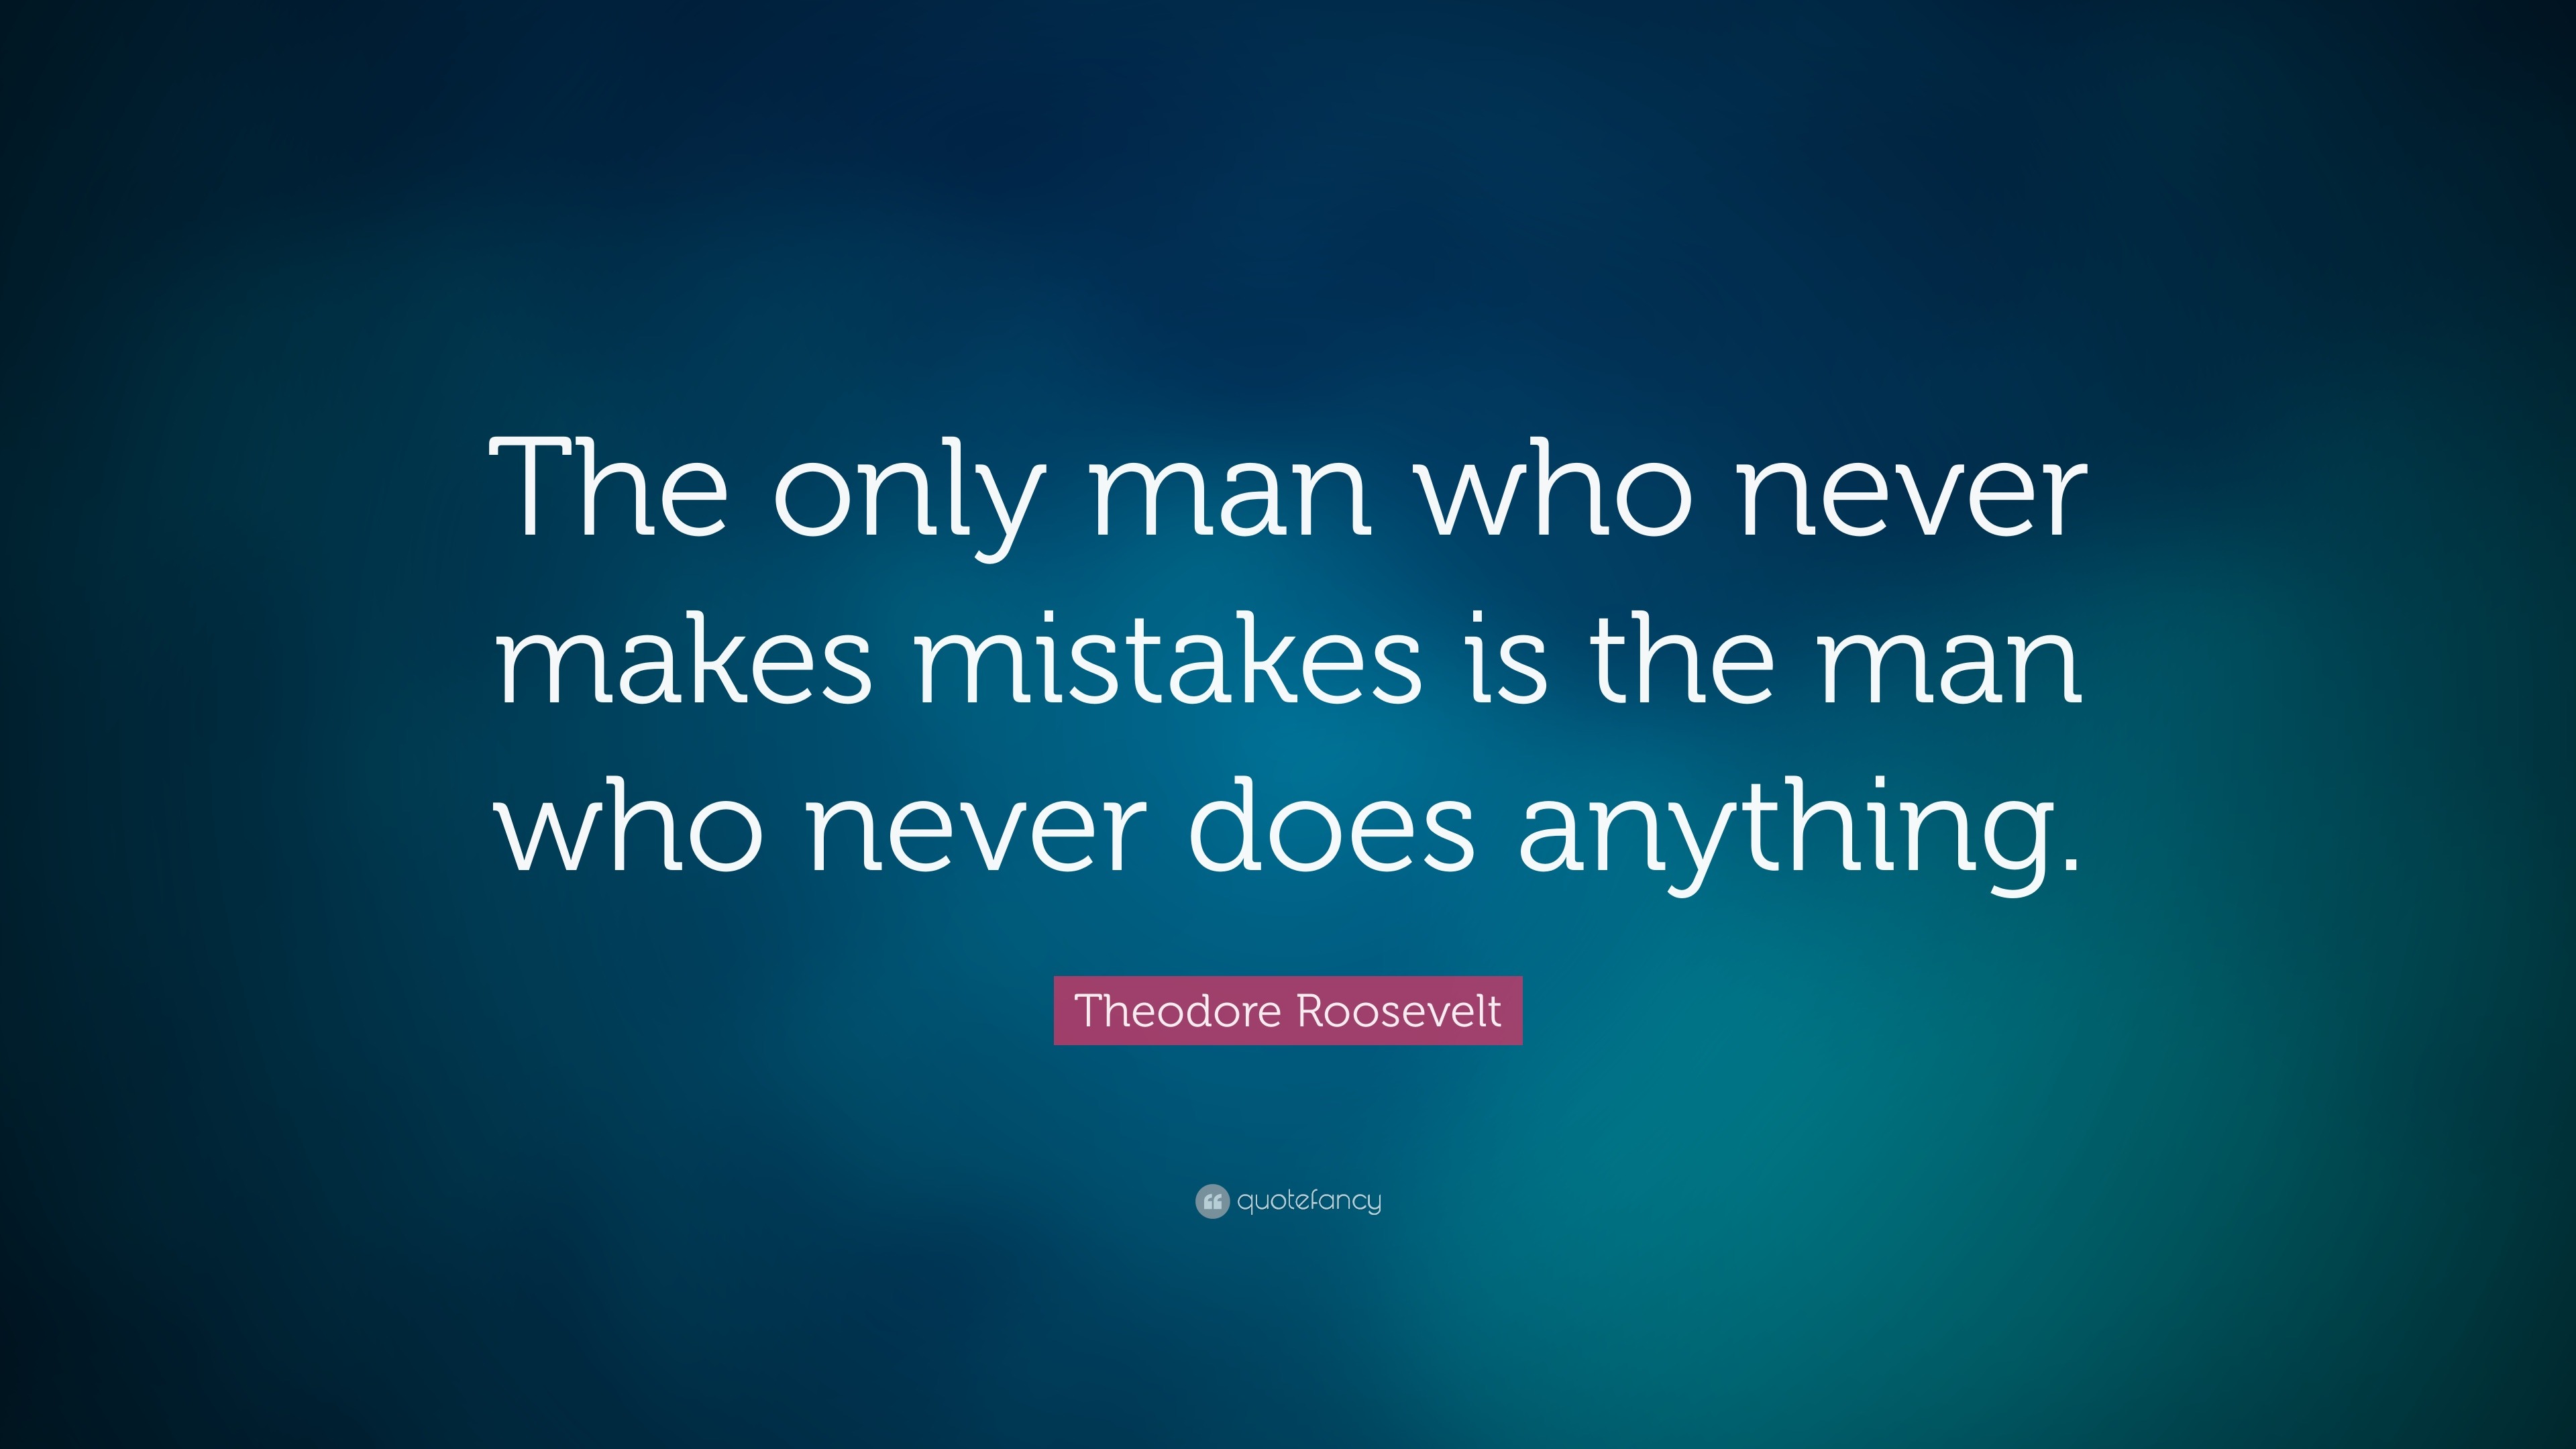 Theodore Roosevelt Quote: “The only man who never makes mistakes is the ...